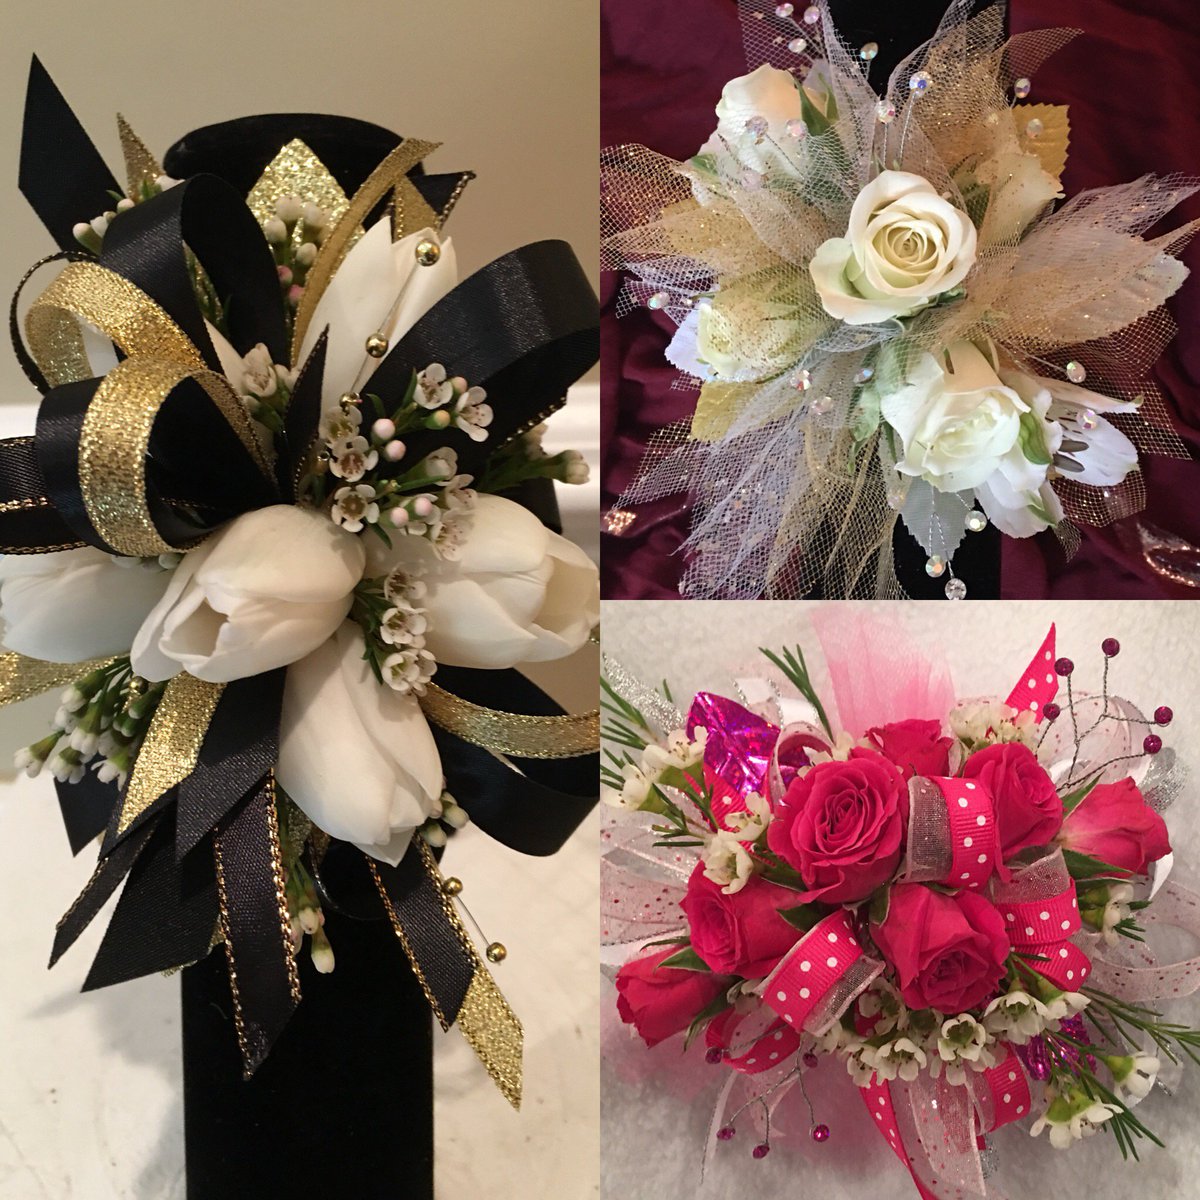 Hey #DunbarPoets! Guess who’s going to her alma mater tomorrow to present prom flowers? #TashaFlowers that’s who! See you in the morning. 😃 ow.ly/wDux30jHJ8f #itsPROMtime #corsgae #boutonnière #PPO3 #Baltimore